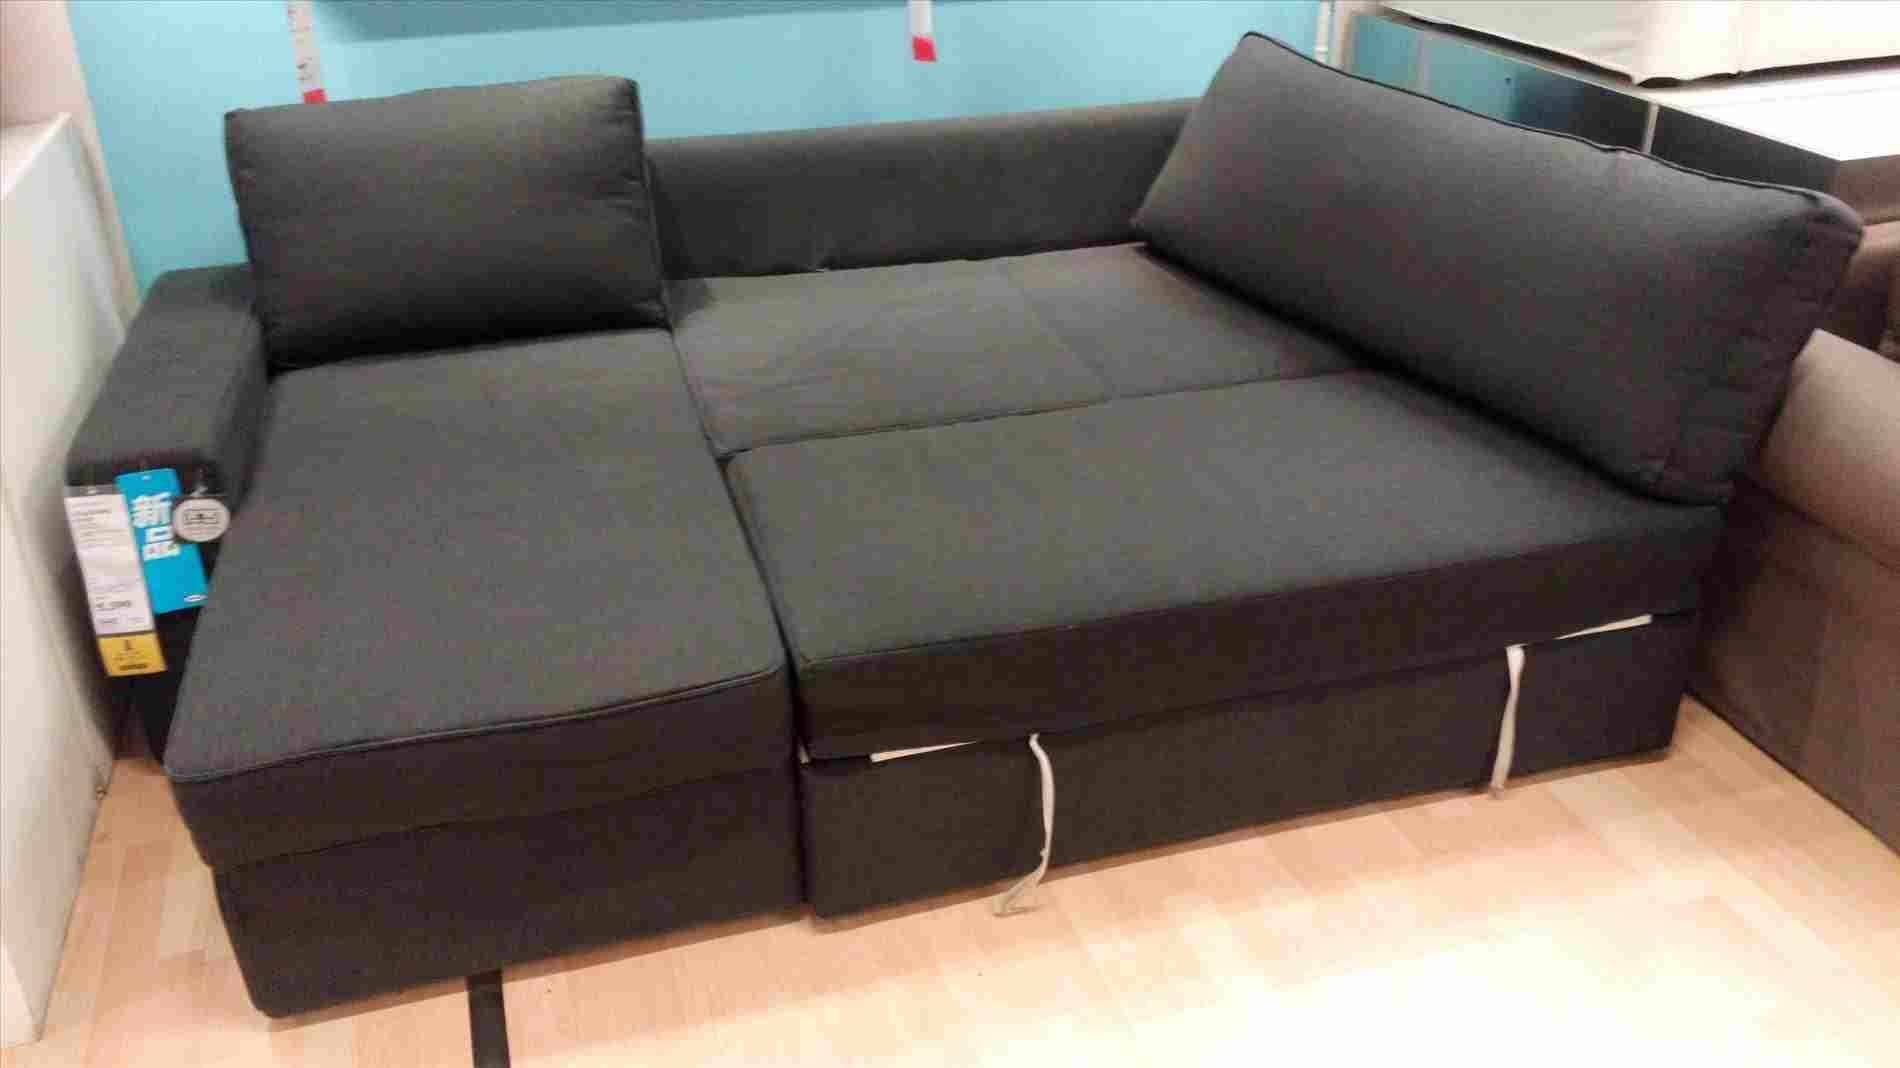 The Brick Sofa Bed | Sofa And Chair Information Inside The Brick Leather Sofa (View 15 of 30)